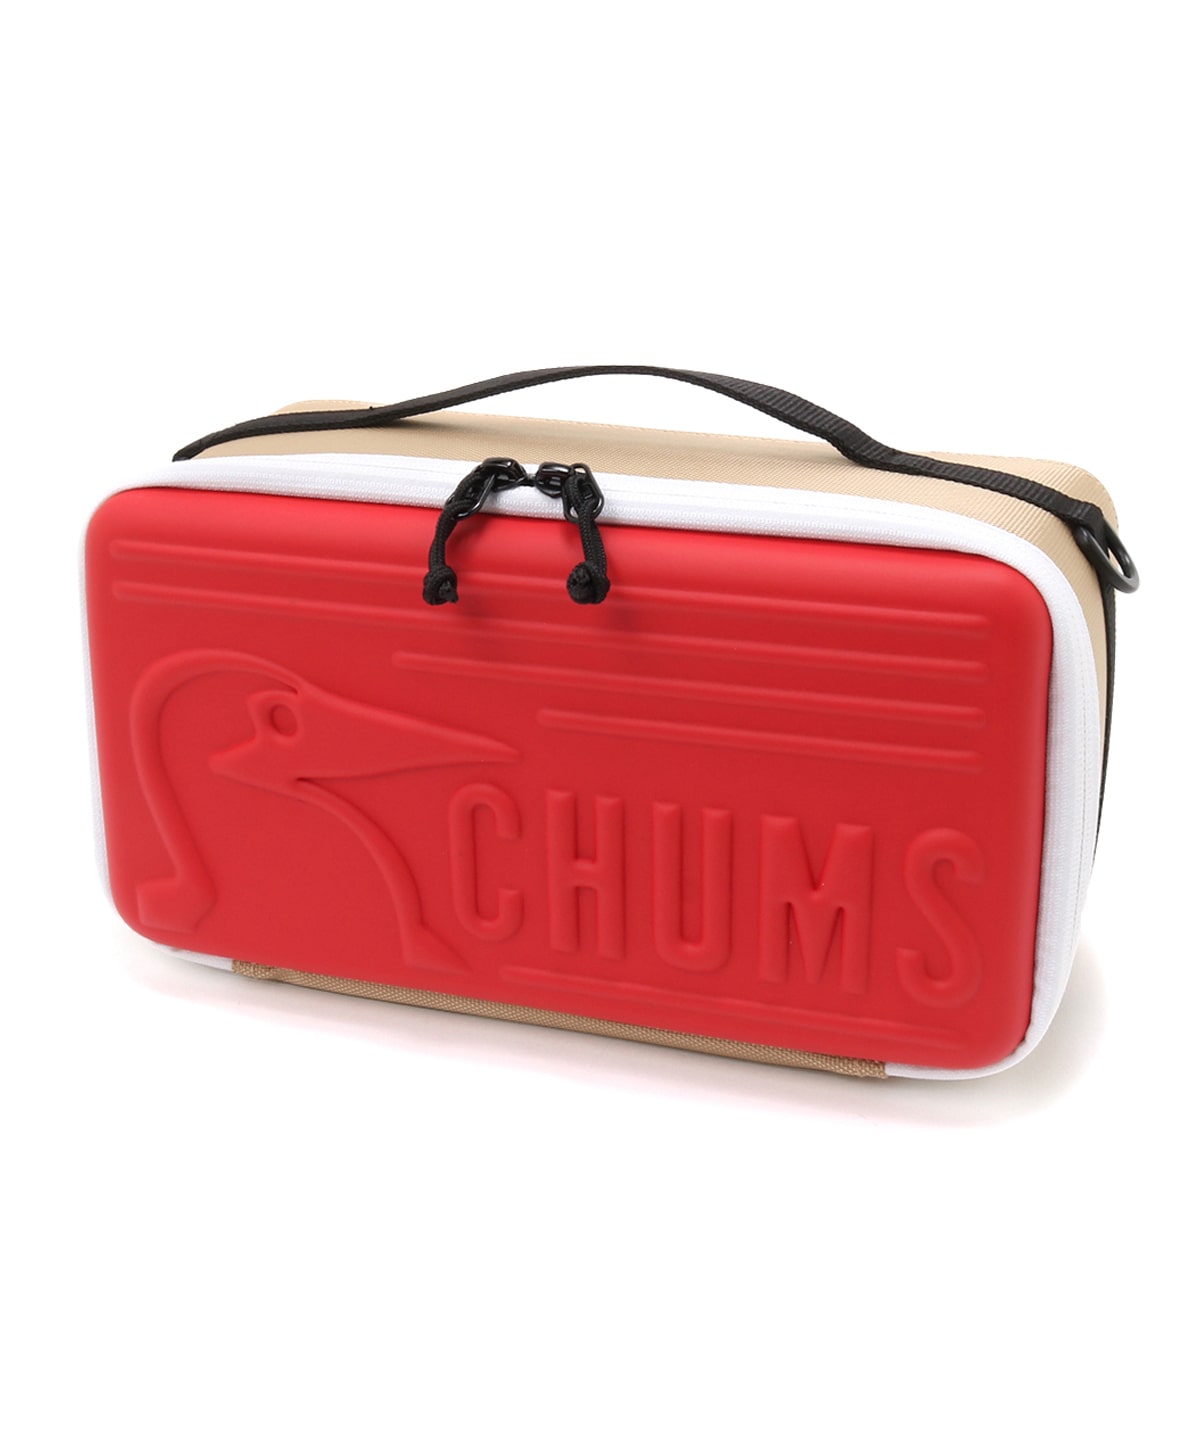 CHUMS BOOBY MULTI HARD CASE M BEIGE / RED